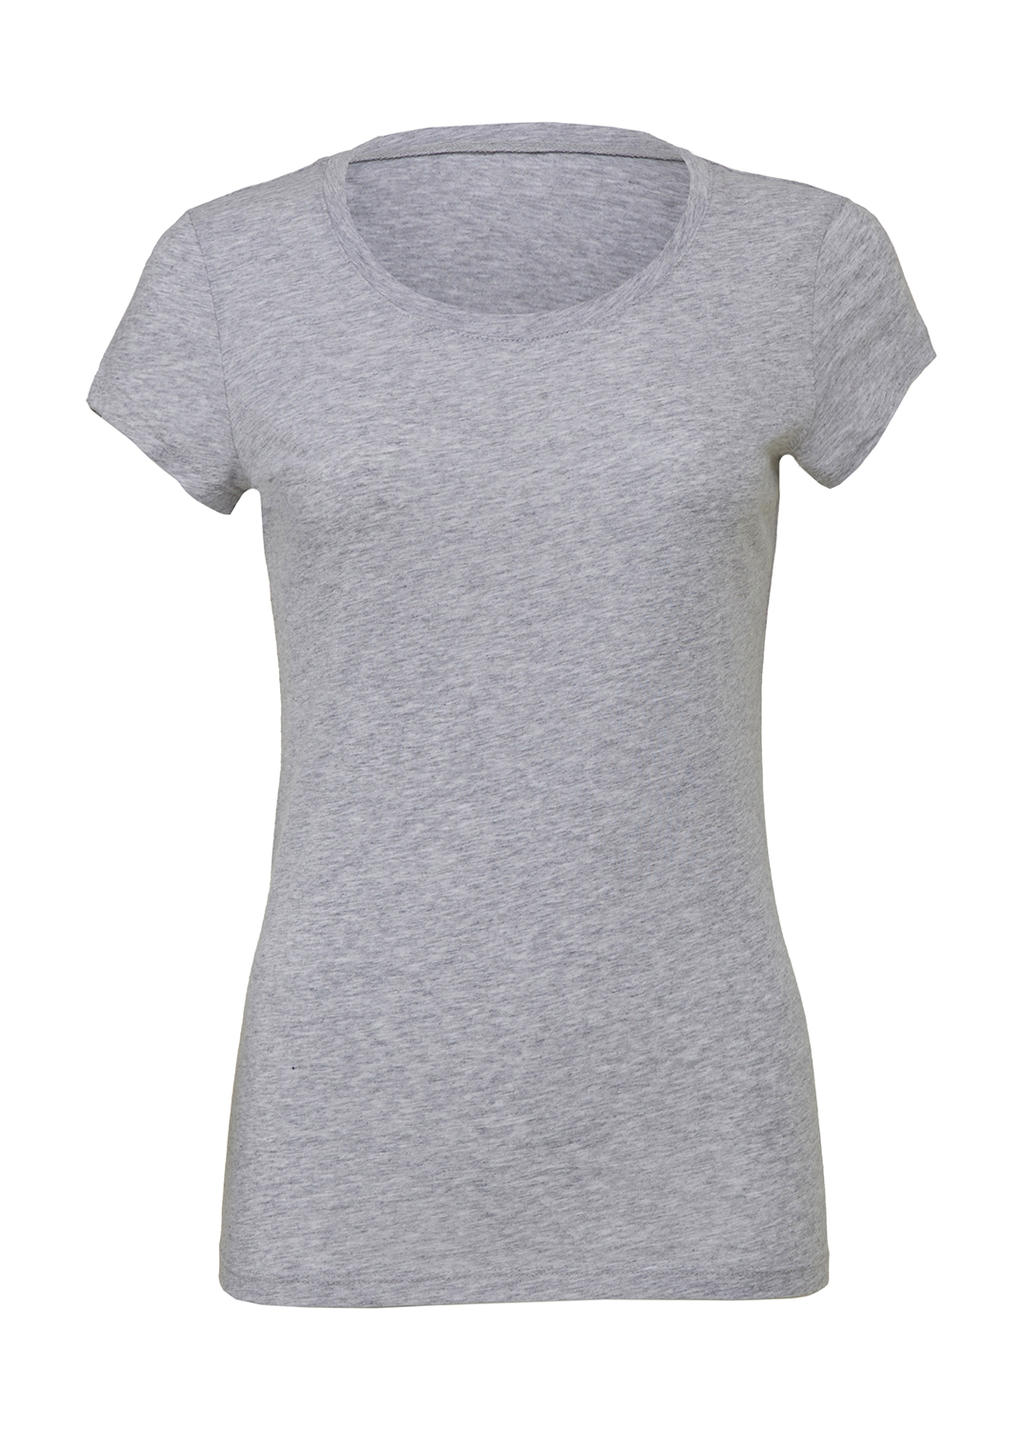  The Favorite T-Shirt in Farbe Athletic Heather